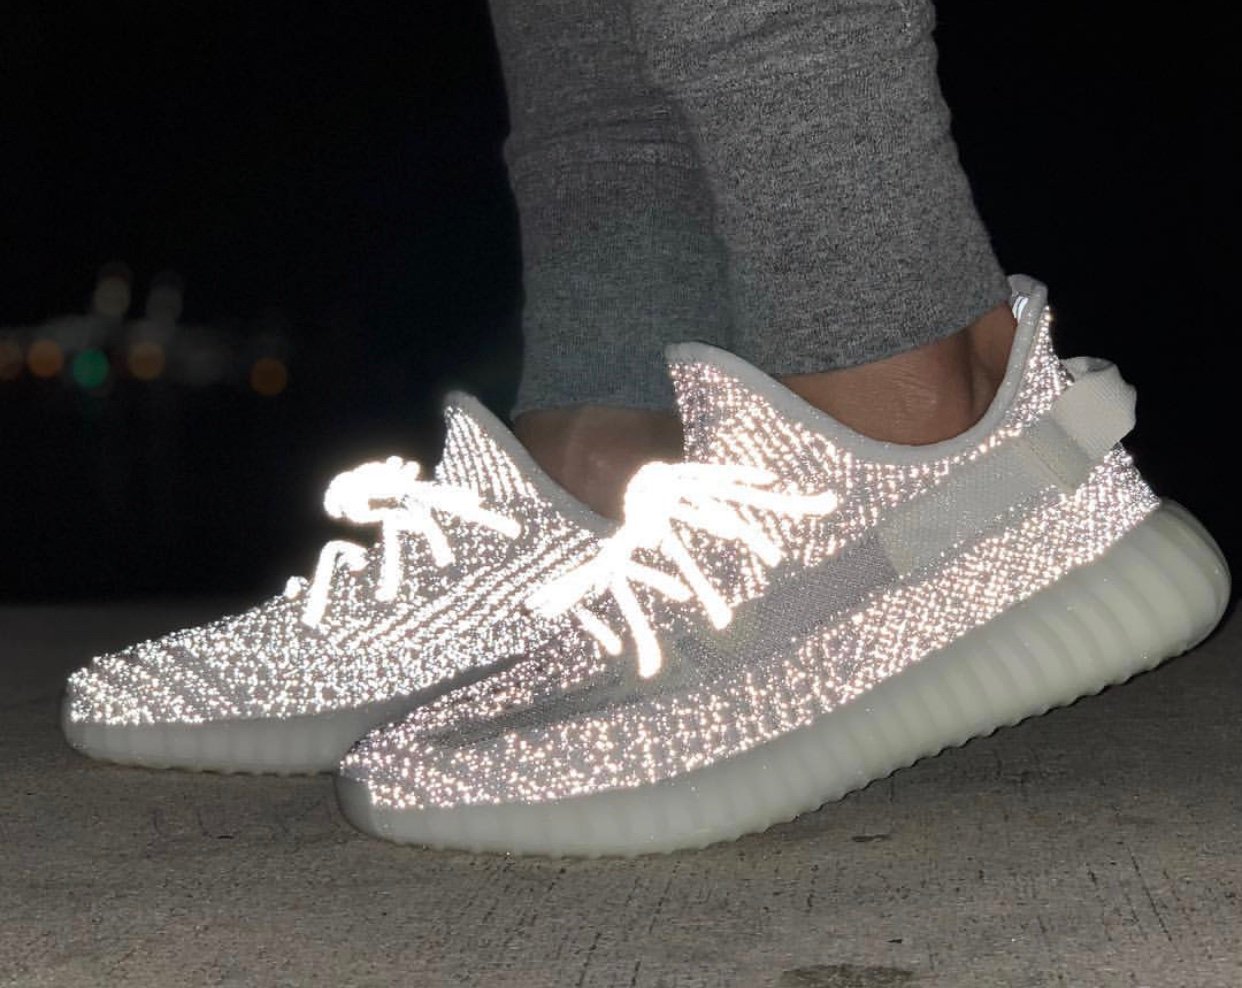 adidas yeezy boost 350 v2 static reflective release date